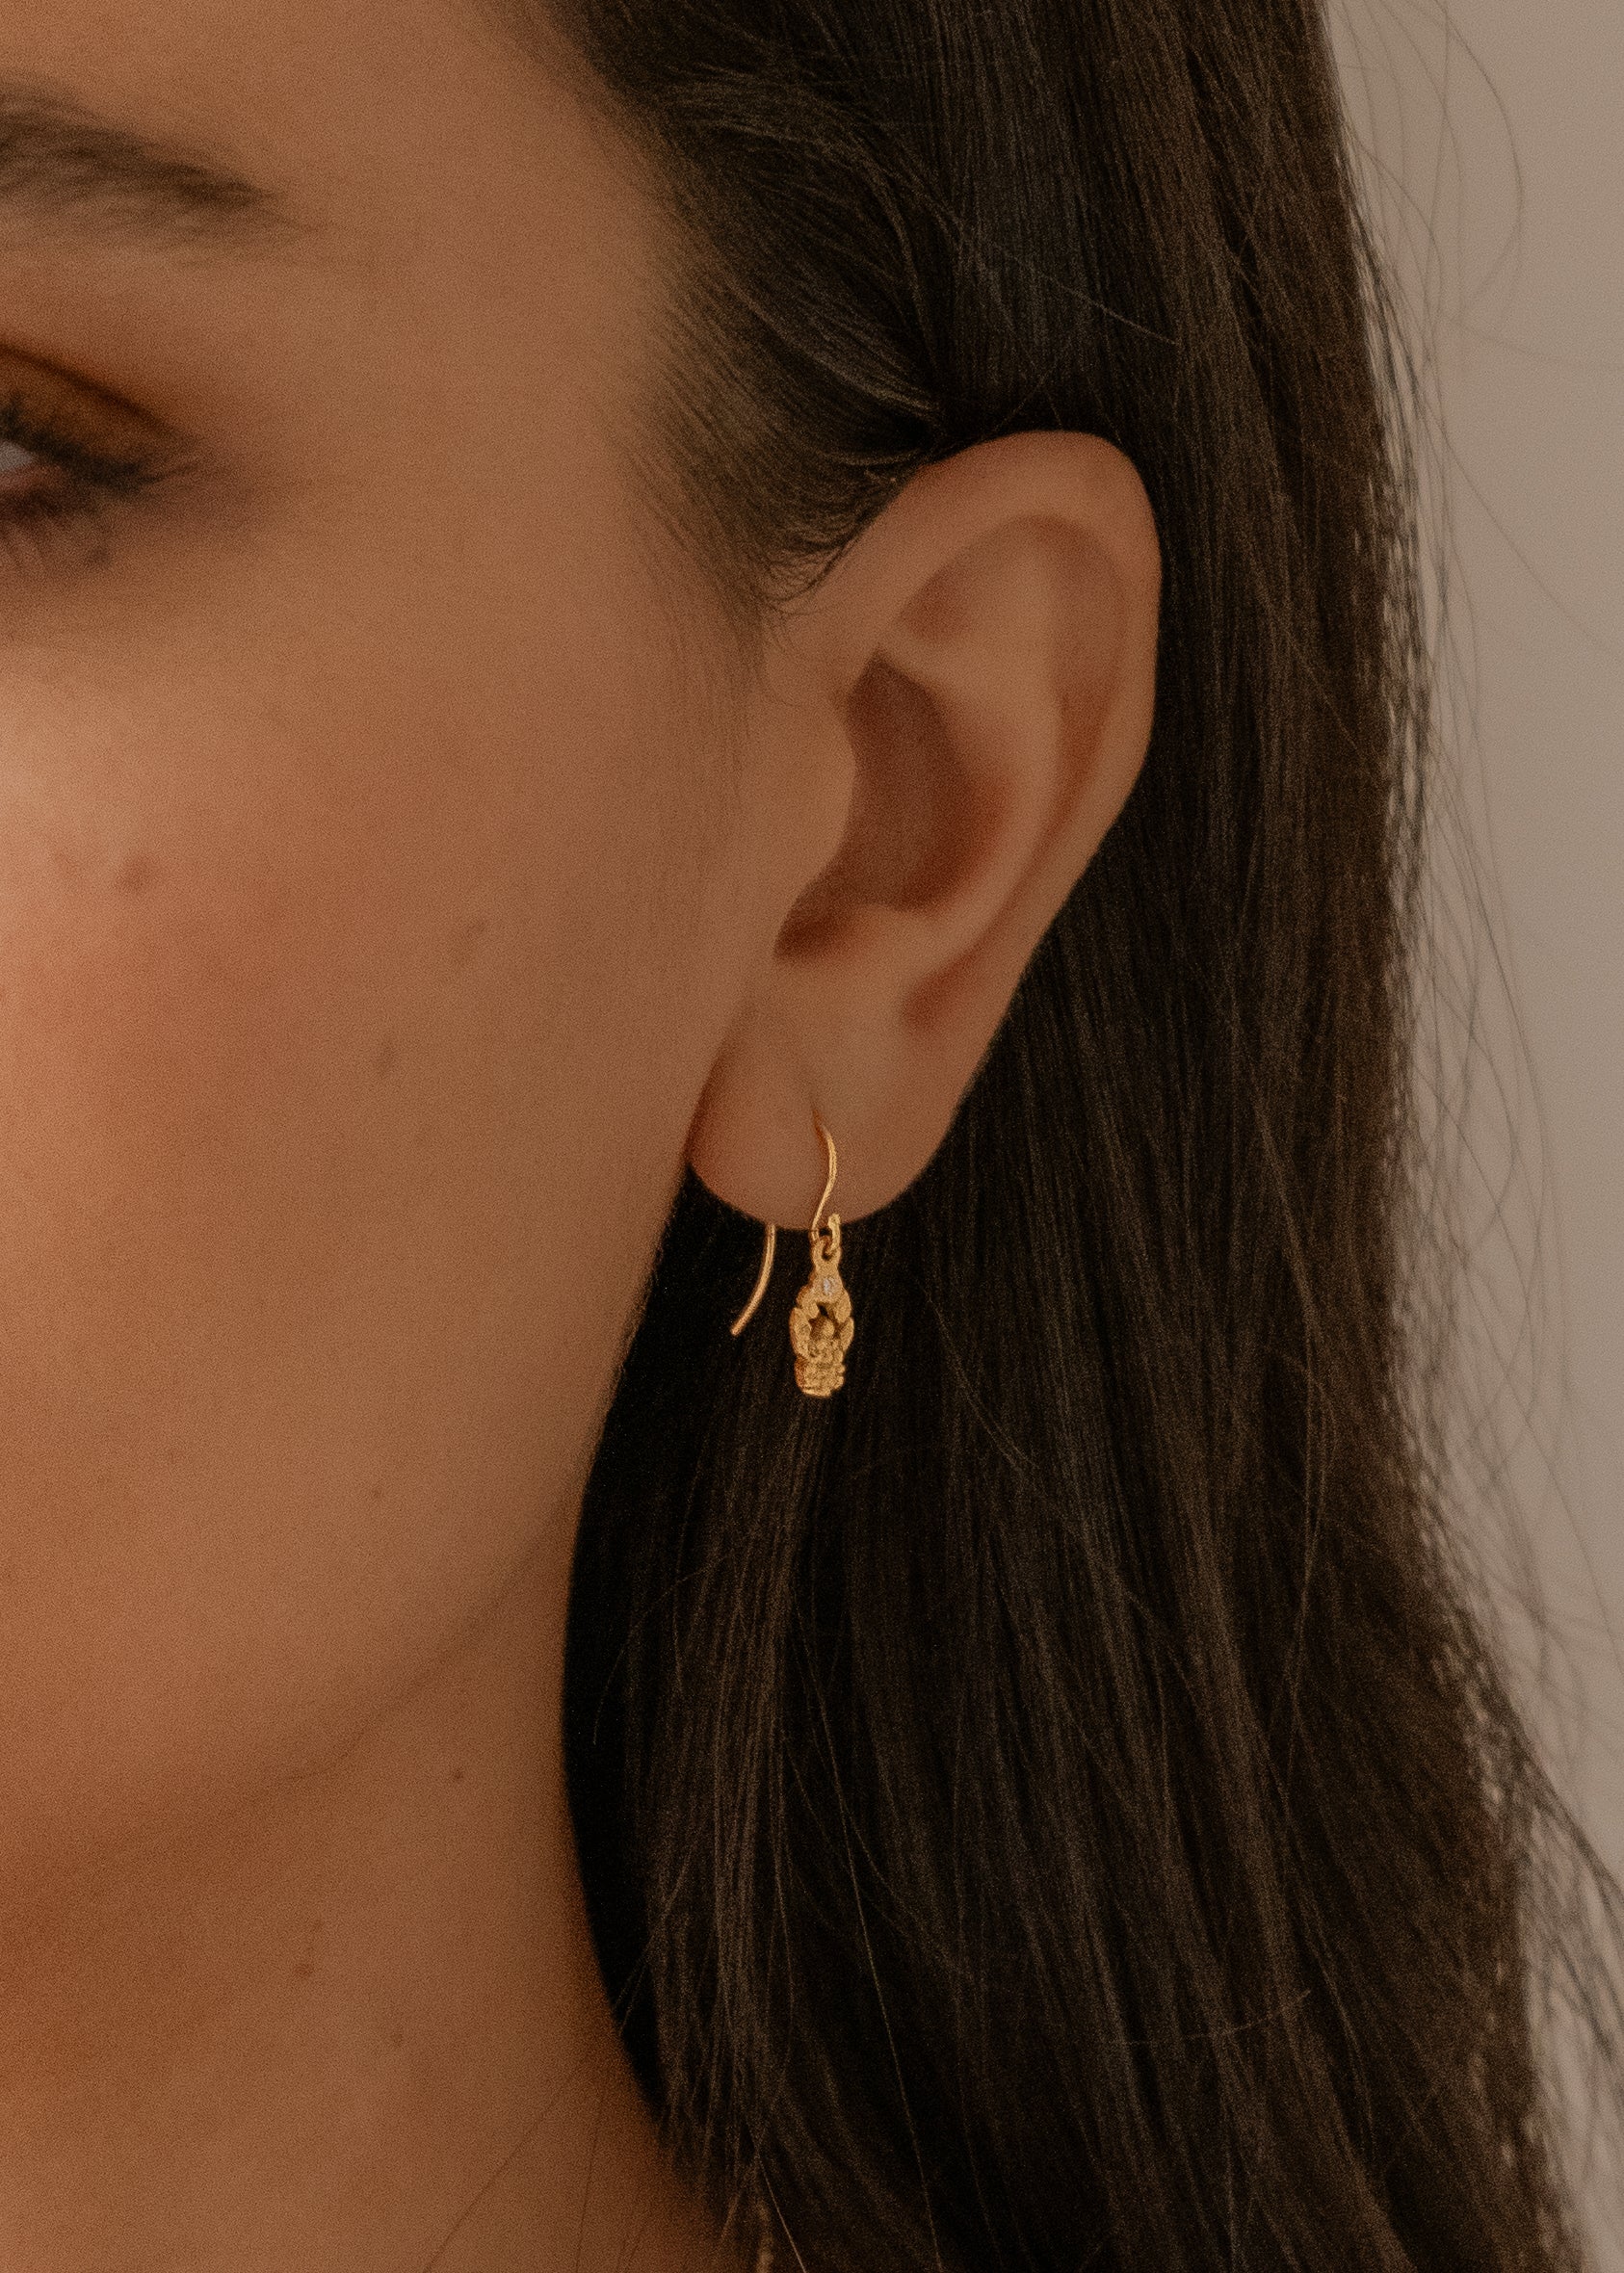 Exquisite details grace the elegant lines of the Pincer earring, a whimsical design that creates the illusion of golden drops being held in place by textured pincers. Gleaming diamonds at the top of the earring add a brilliant sparkle—a true celebration of craftsmanship. 